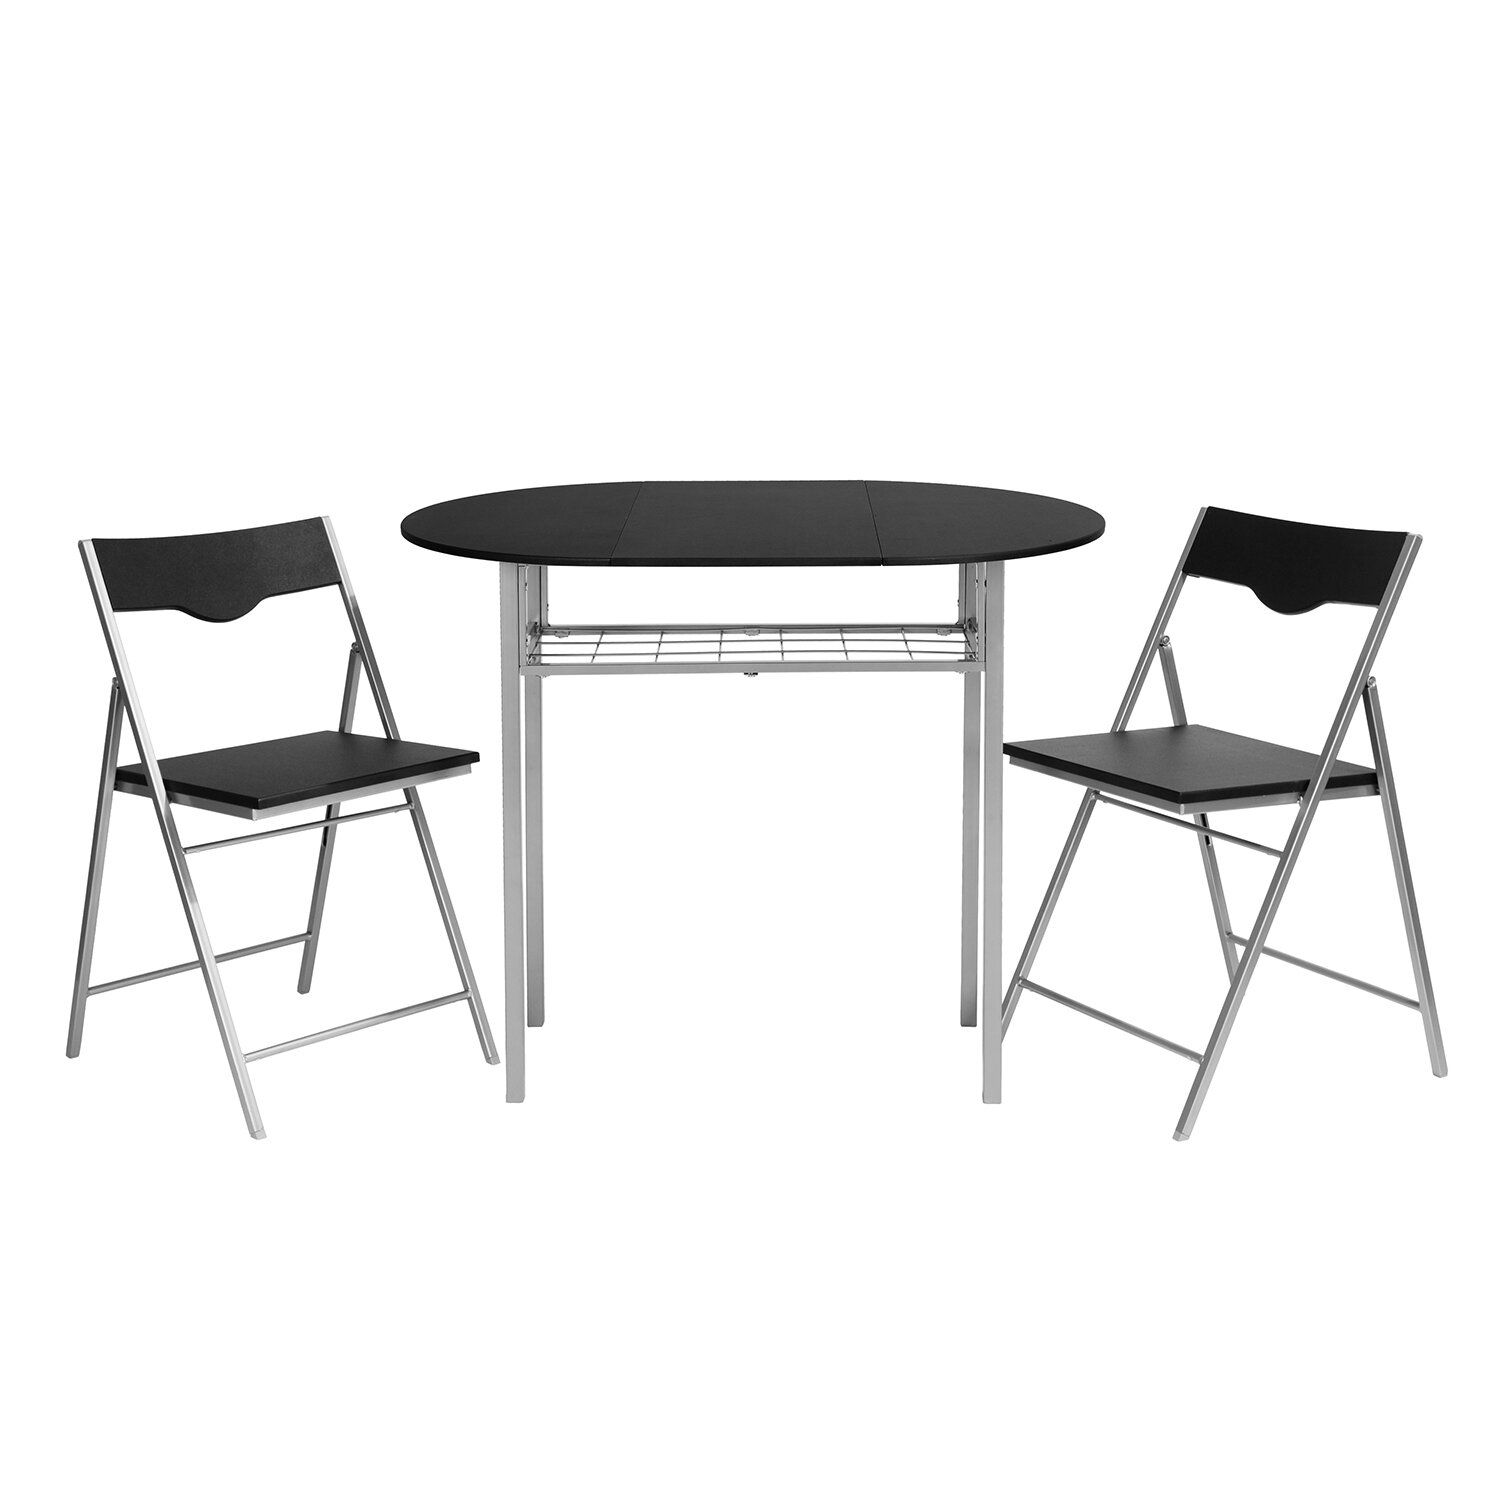 Featured Image of Honoria 3 Piece Dining Sets